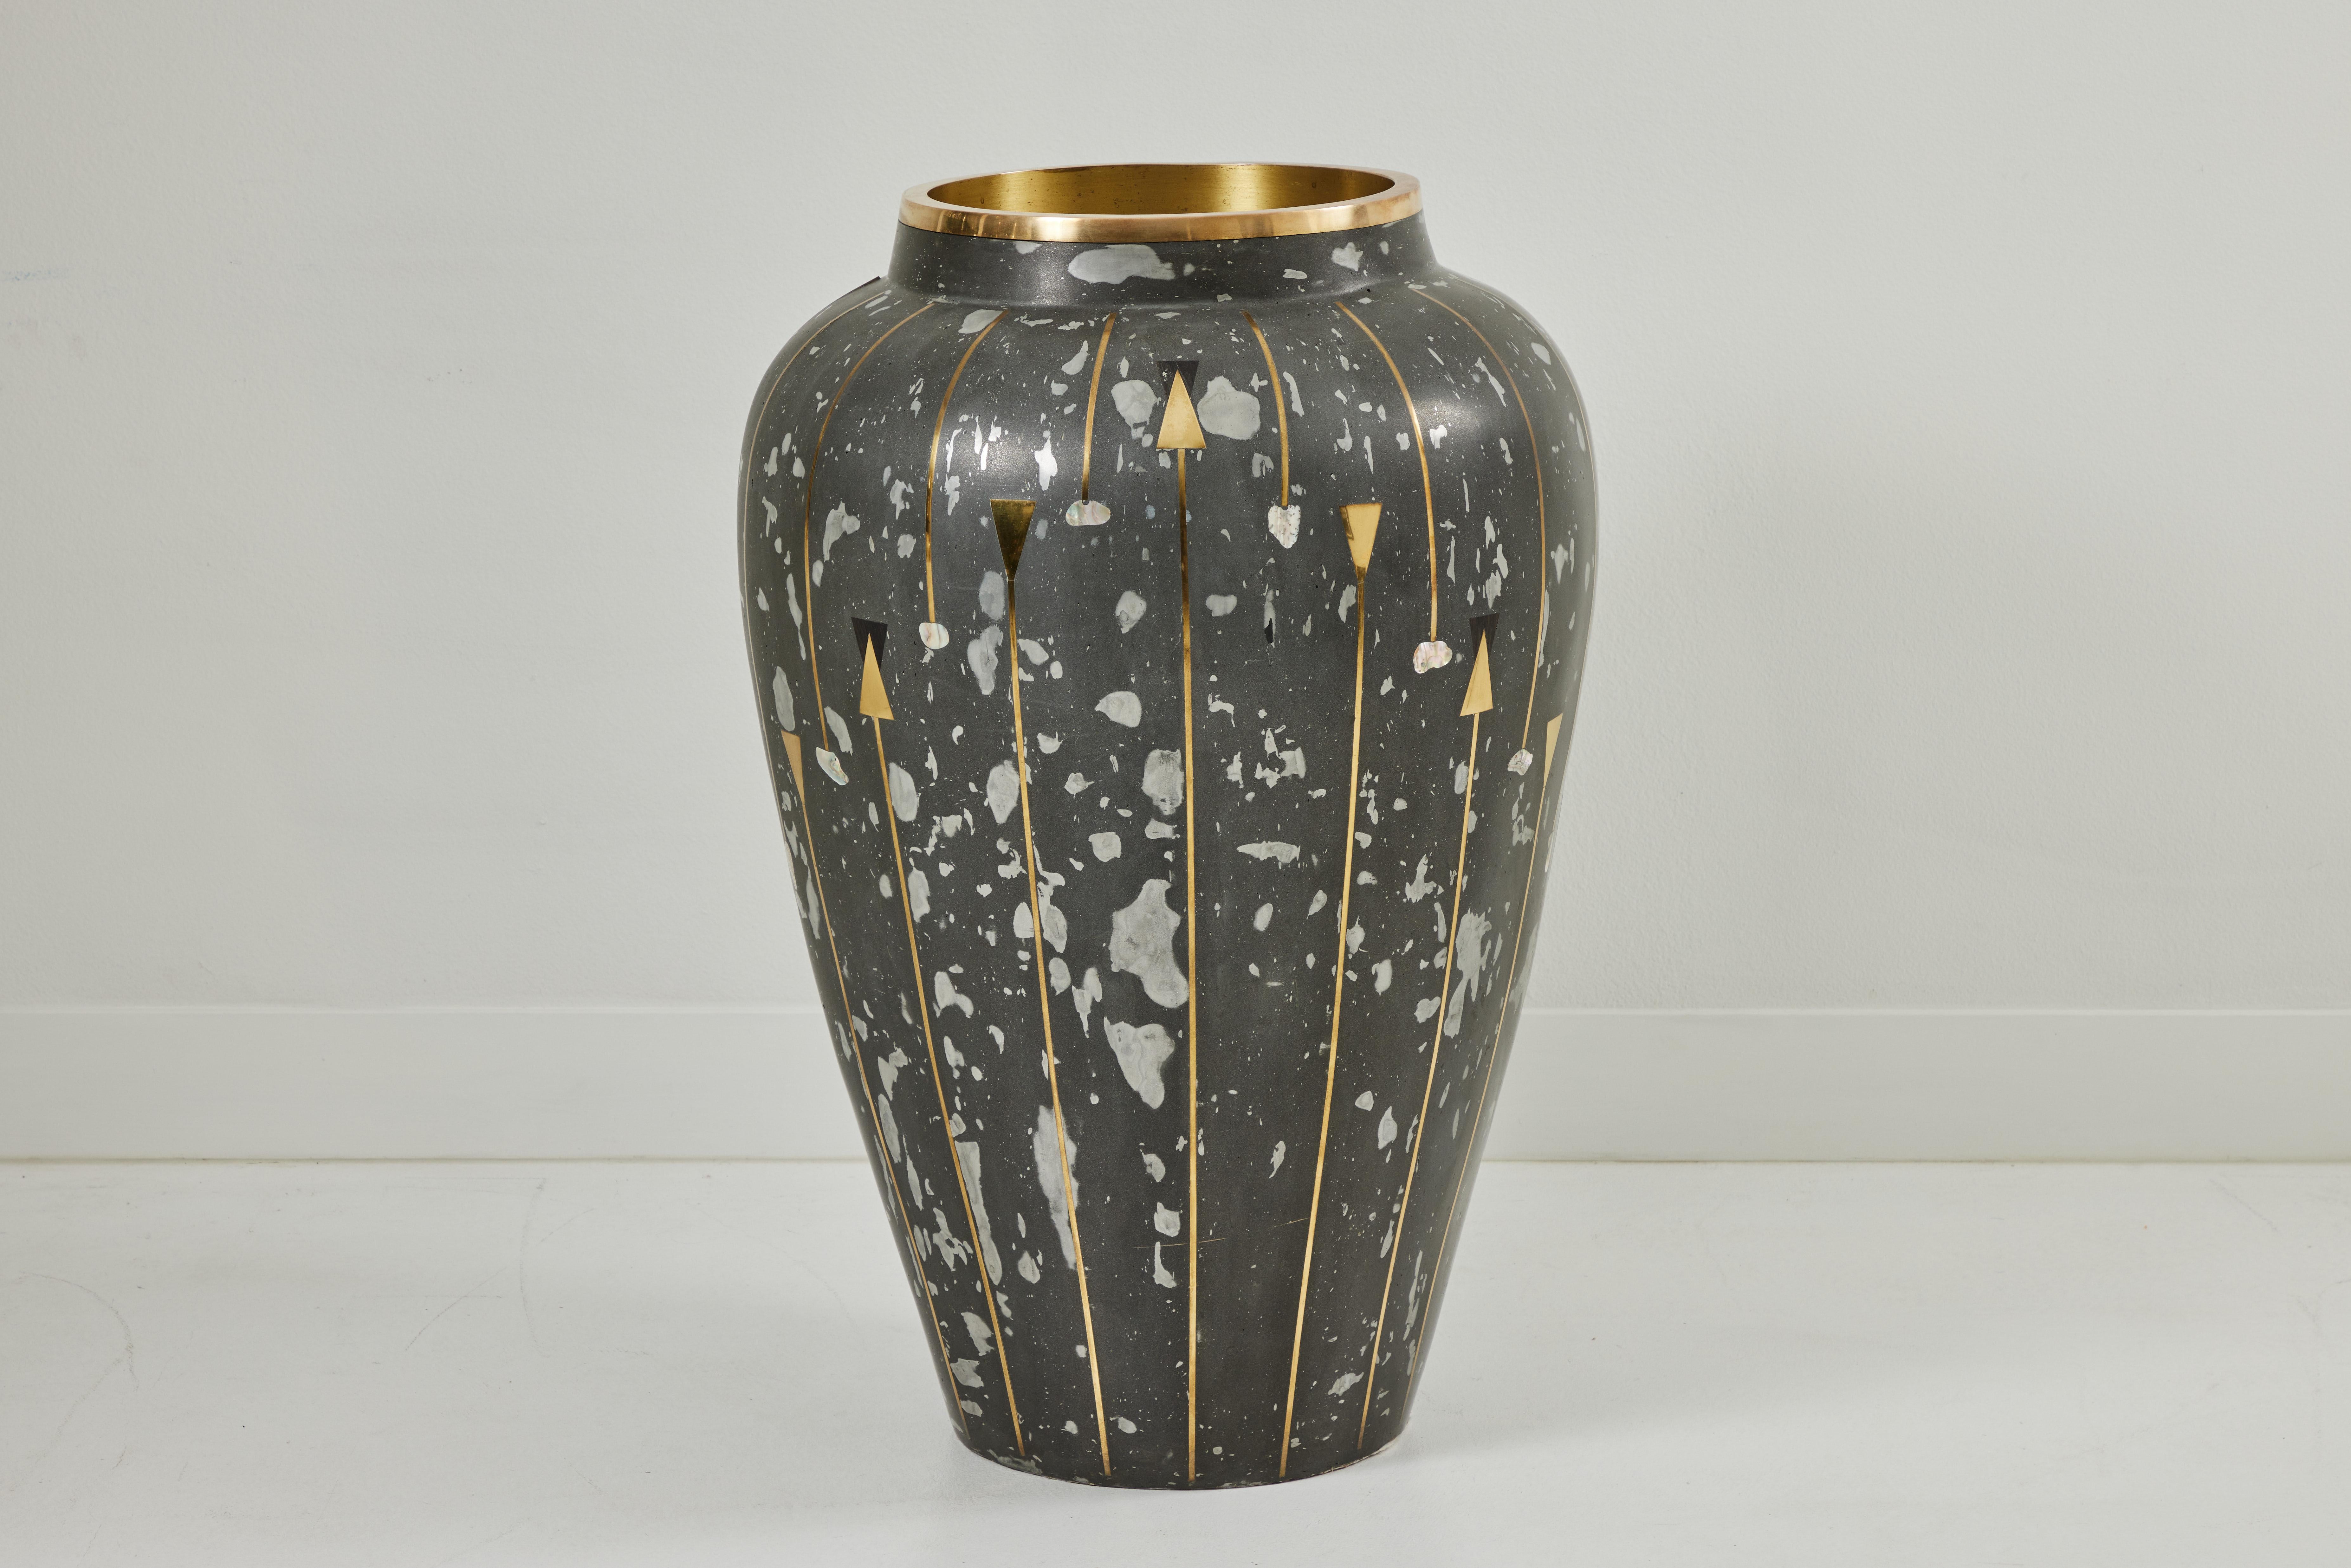 These spectacularly oversized composite cast urns boast a height of 40 inches and a diameter of 26 inches. Fabricated in Glasurite, these urns feature brilliant inlays of ebony, mother of pearl, and polished brass. Each urn is unique with it's own